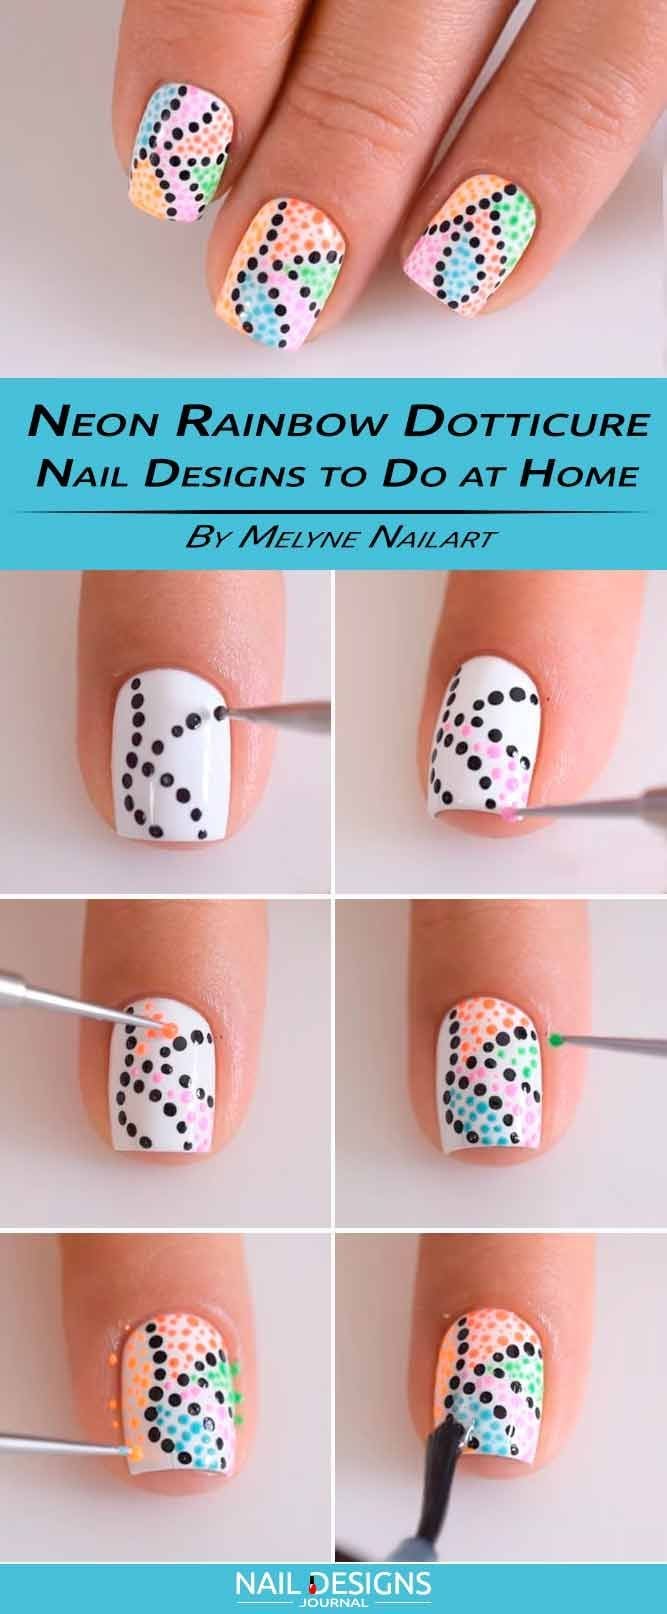 [ad_1]

How to do Nail Designs at Home? ★ See more: naildesignsjourna… #nails
Source by petrasmits
[ad_2]
			
			…